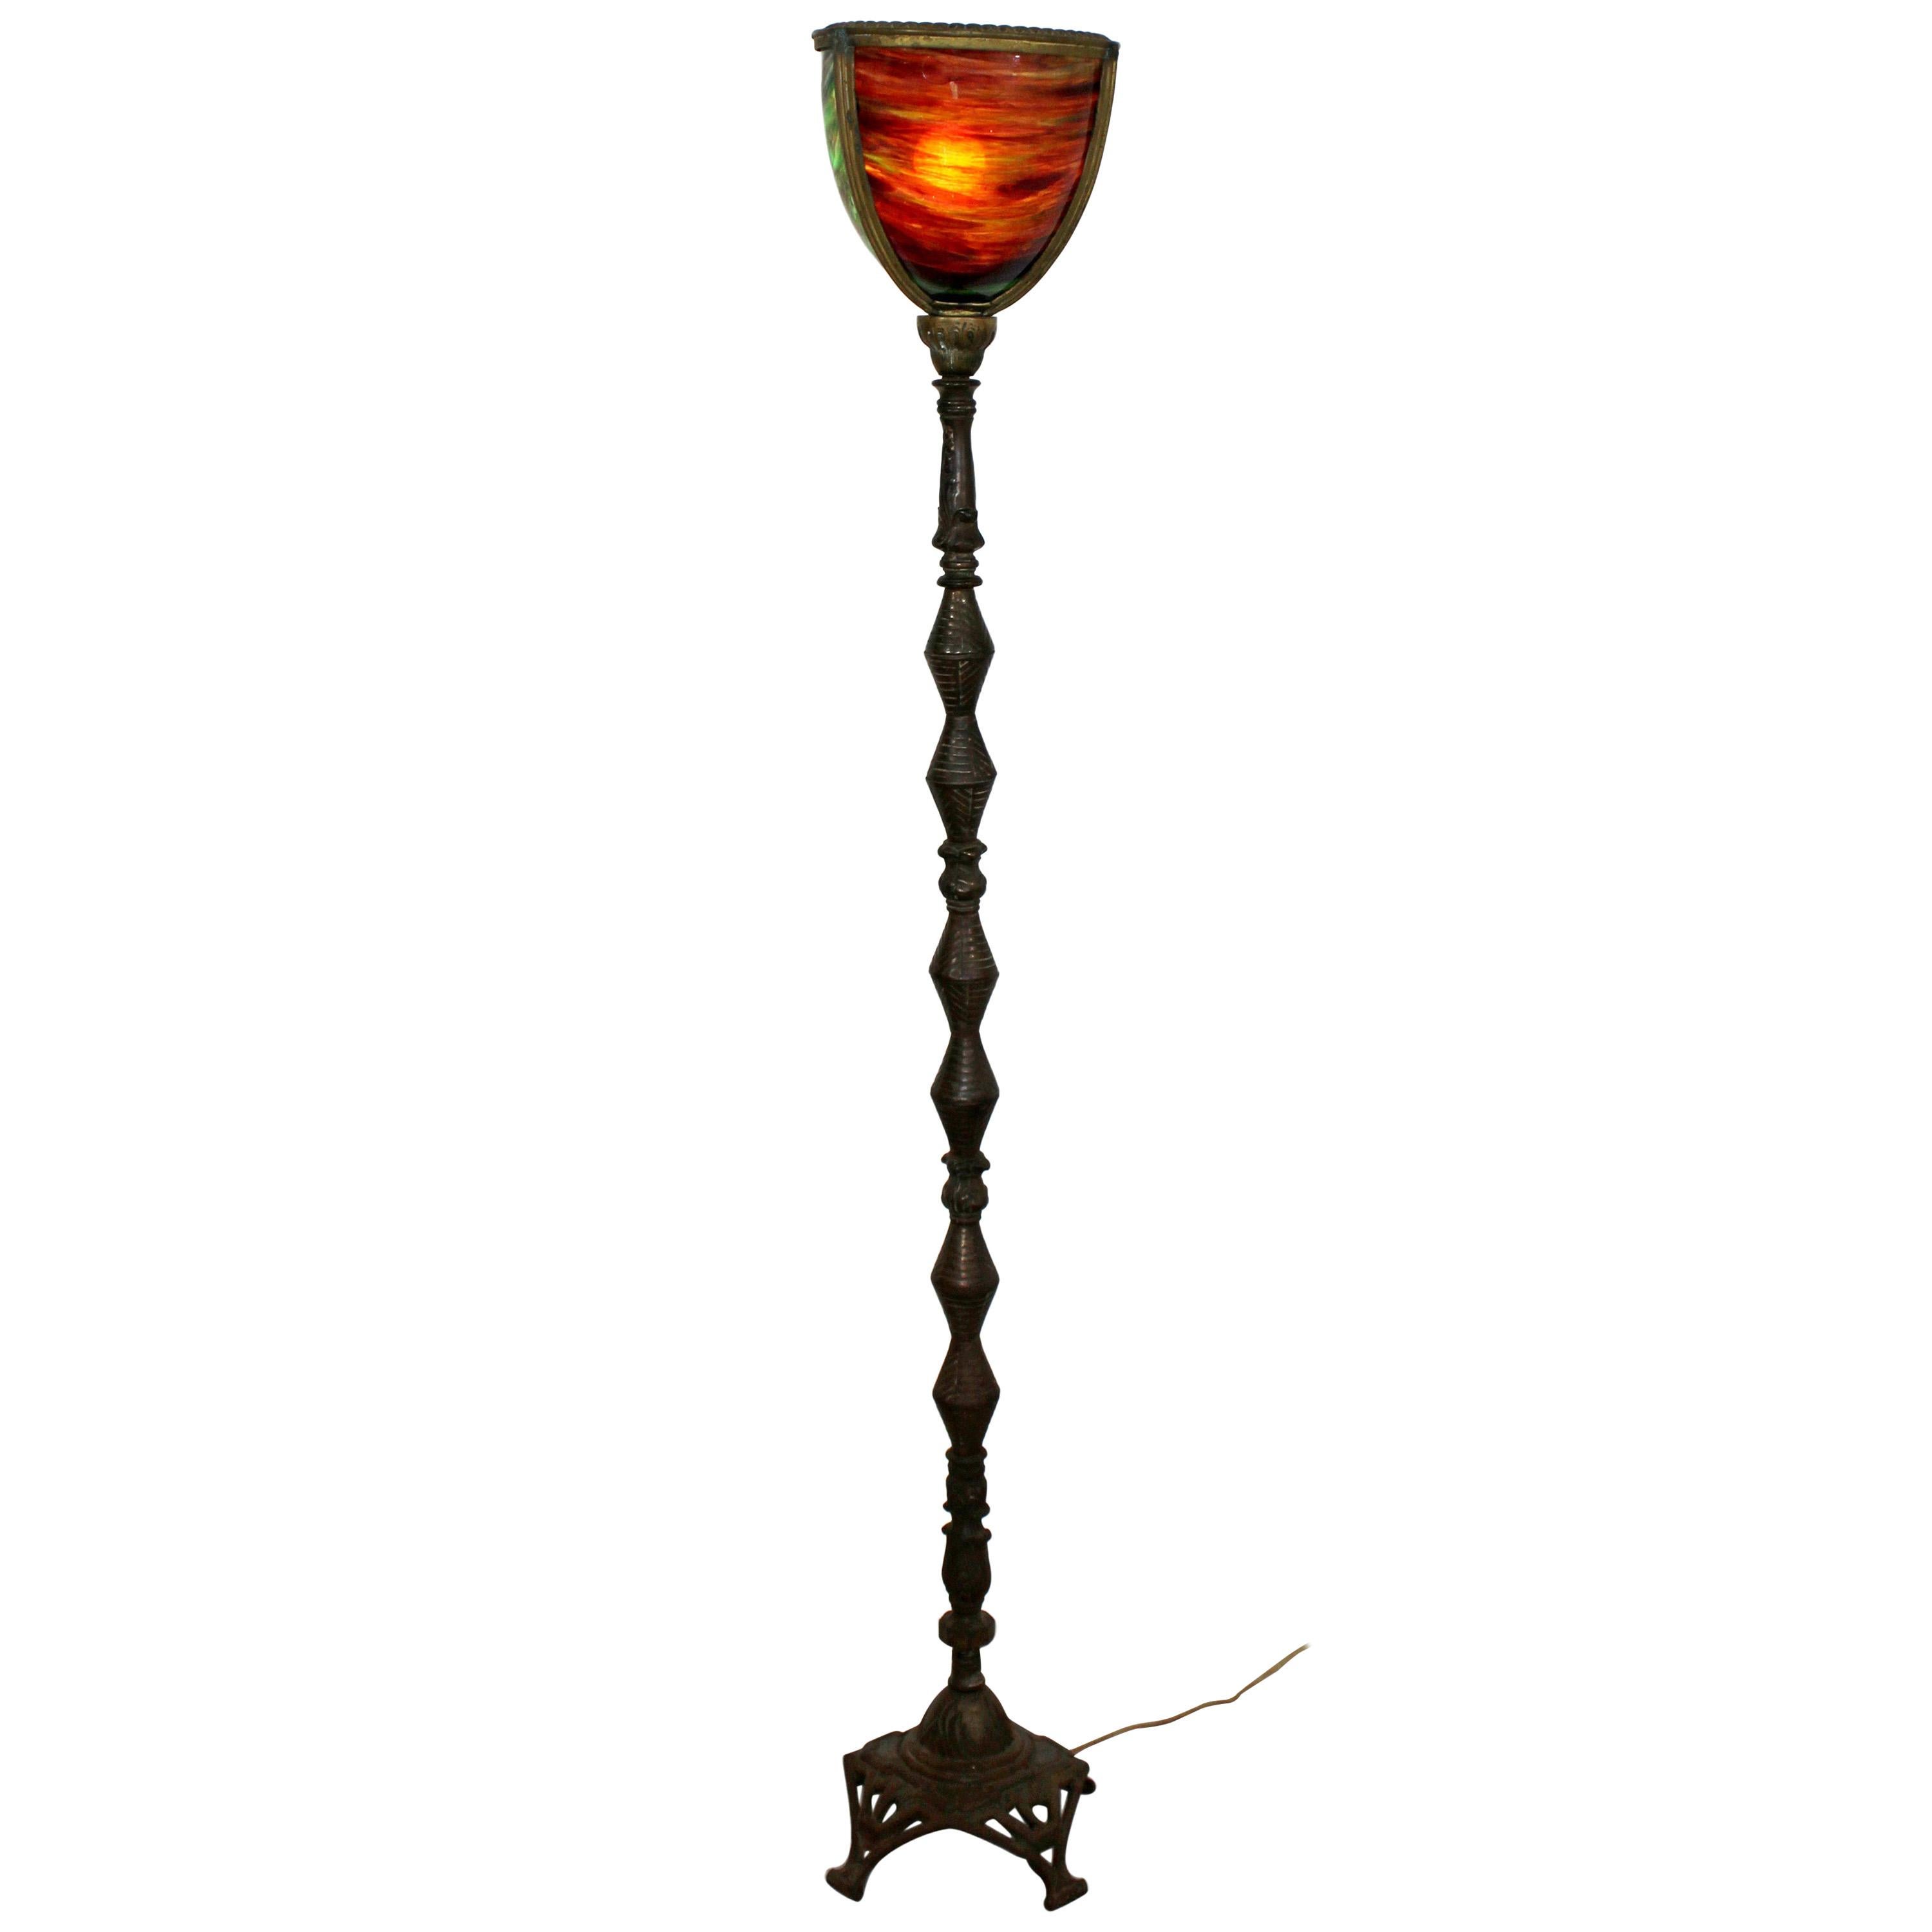 Art Deco Torchiere Metal and Colored Glass Floor Lamp